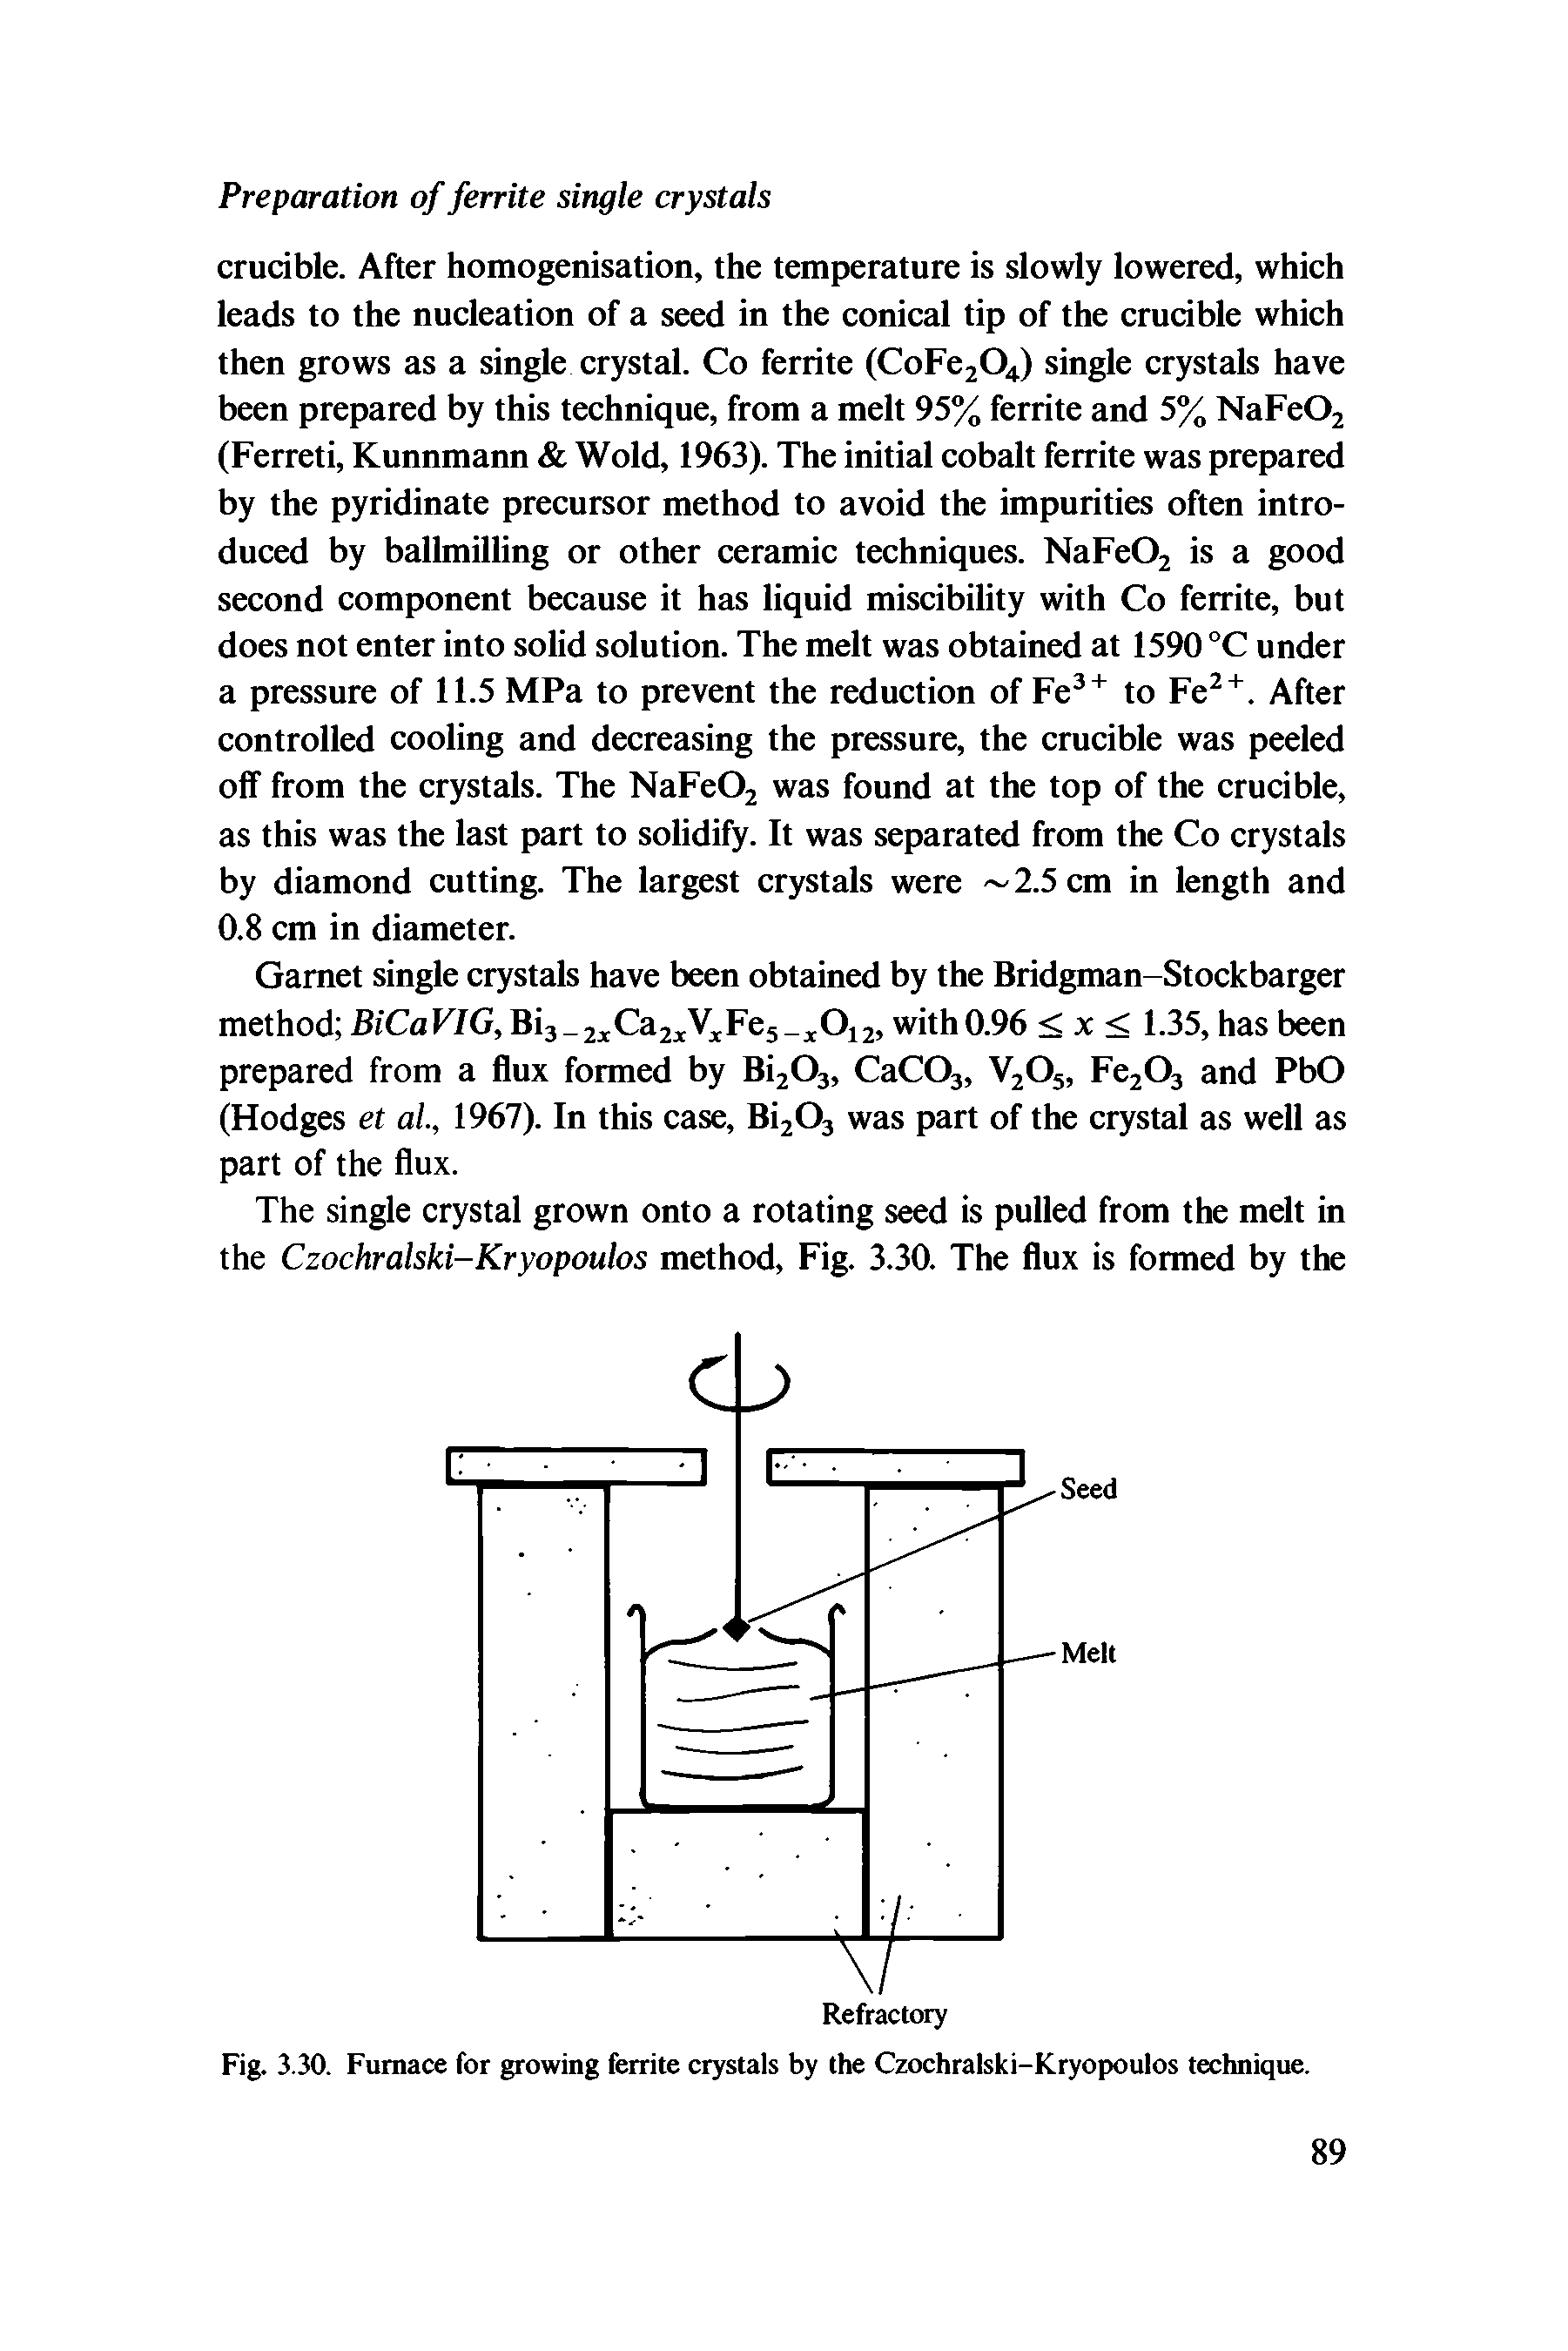 Fig. 3.30. Furnace for growing ferrite crystals by the Czochralski-Kryopoulos technique.